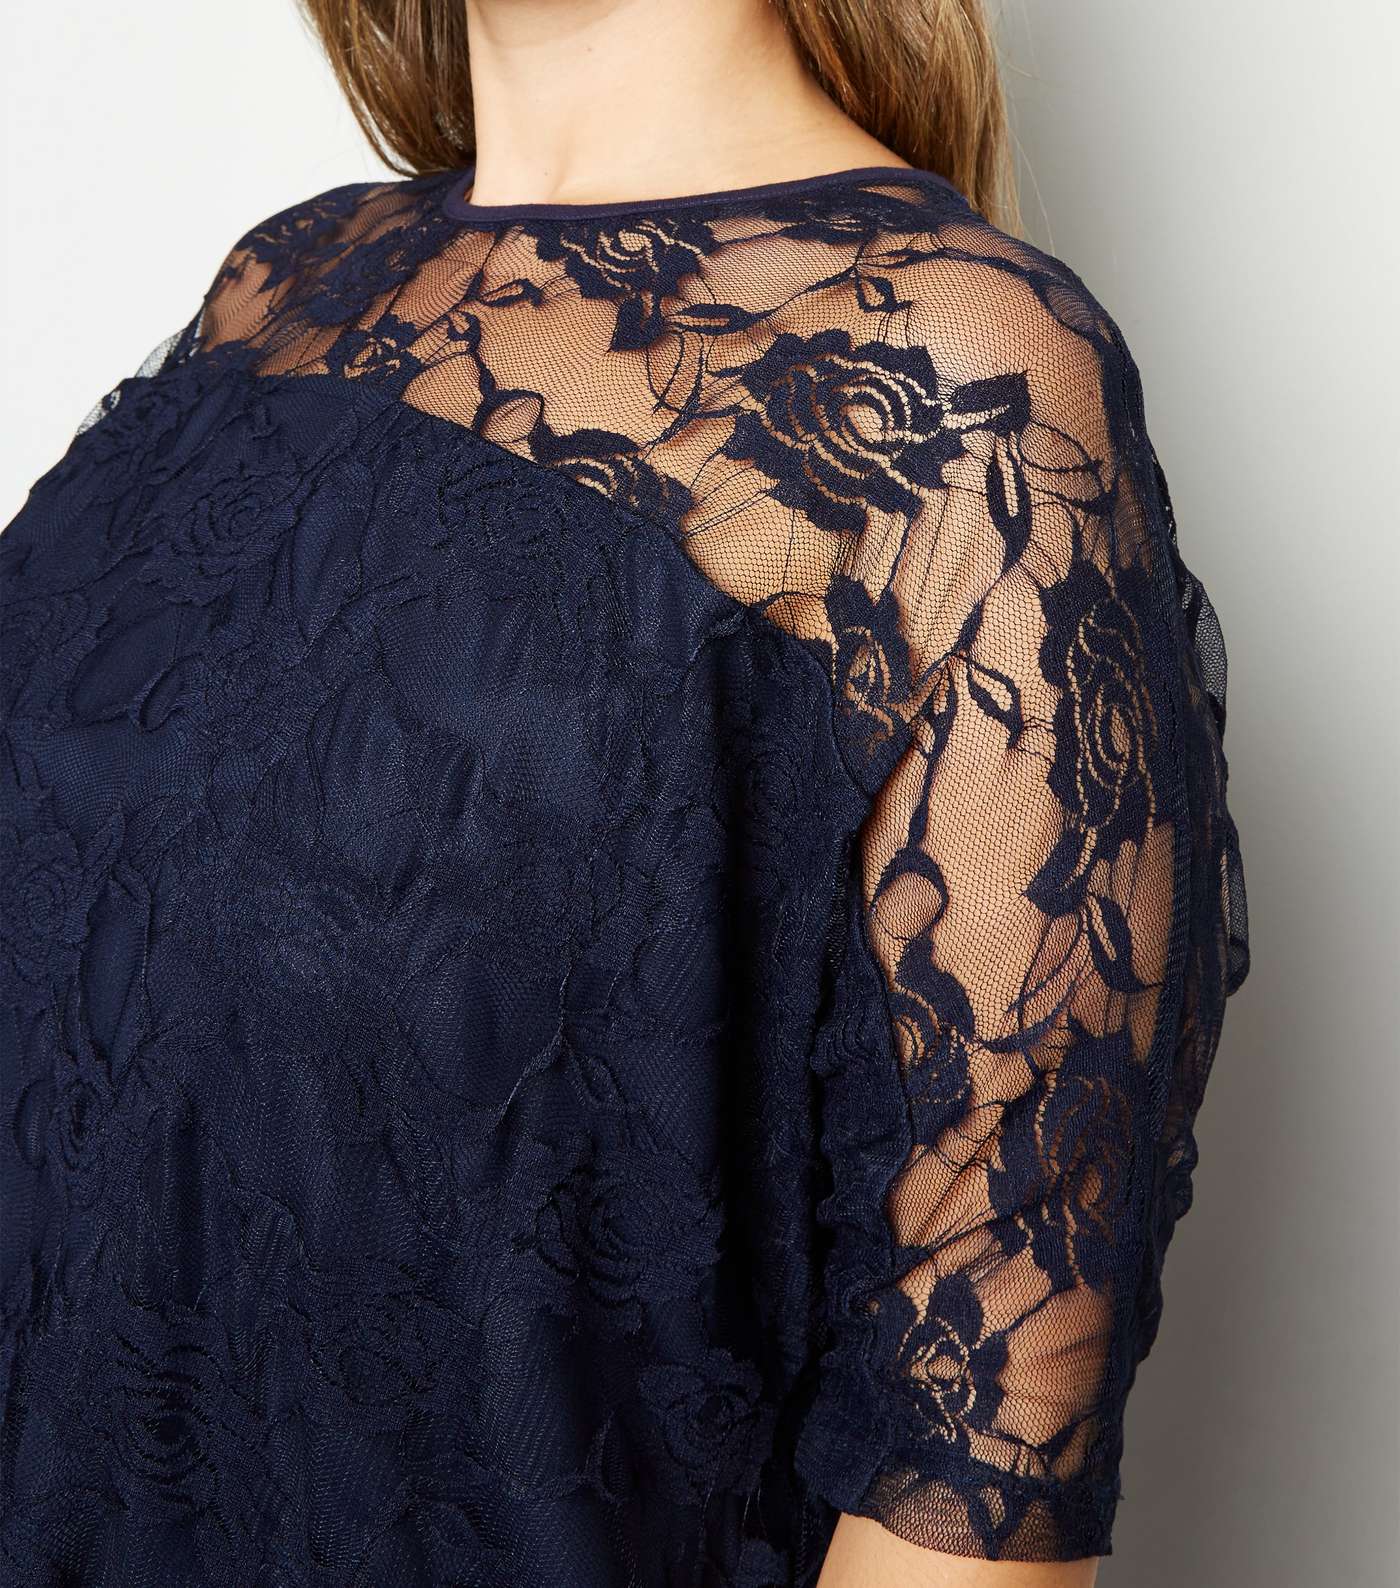 Mela Curves Navy Lace Overlay Top Image 2